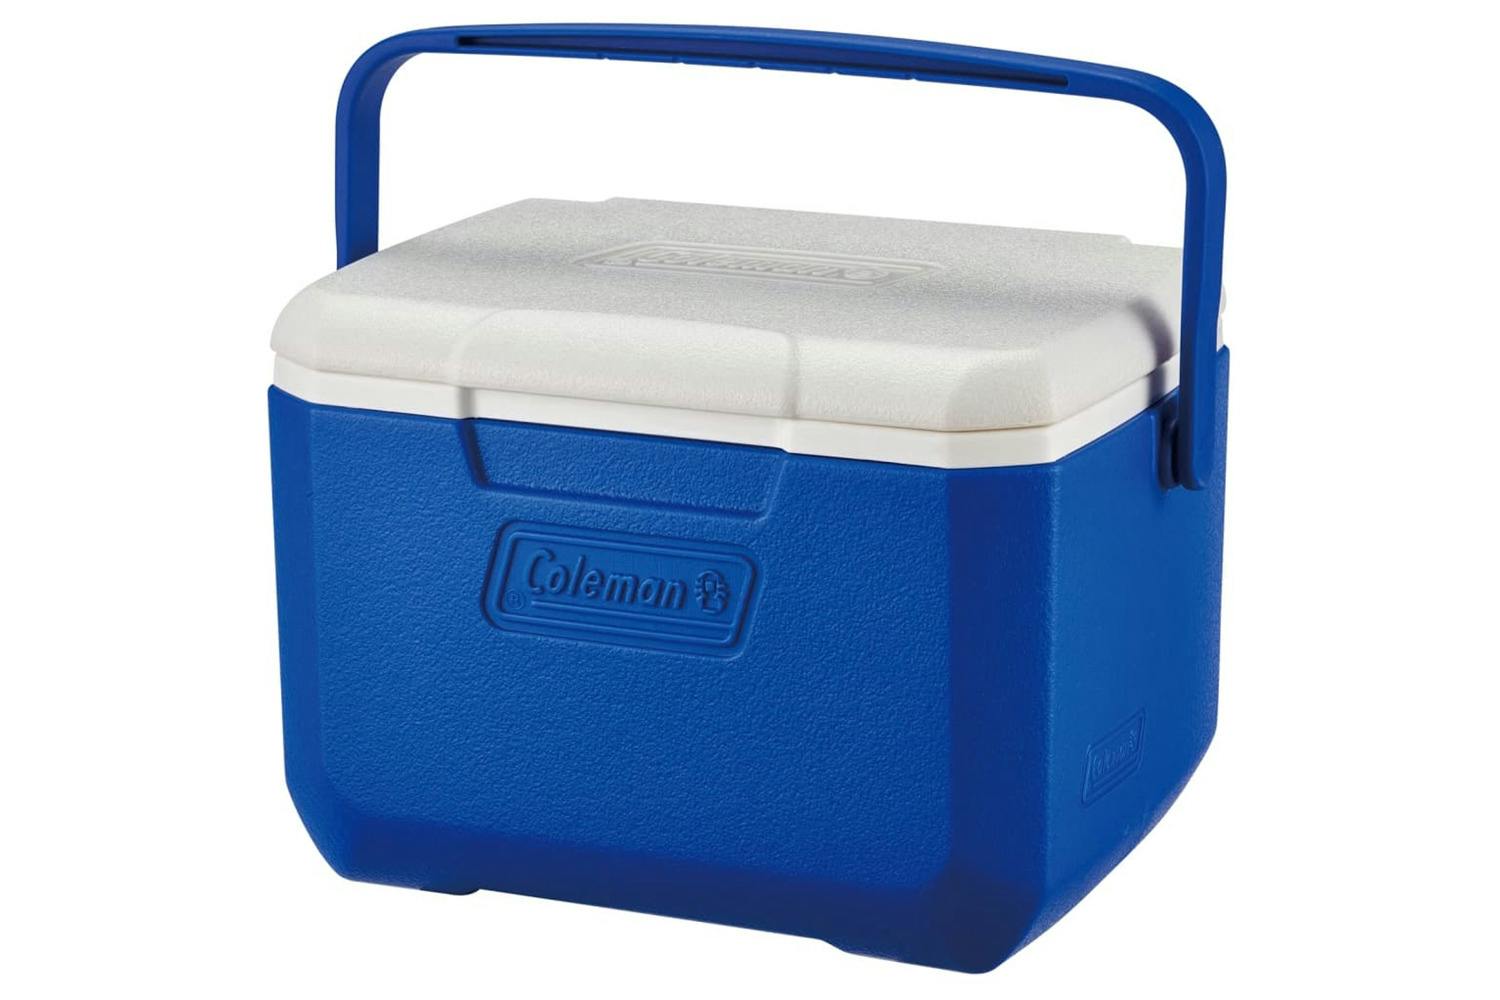  Fishing Ice Box Cooler, Blue Barbecue Storage Freezer Cooler  Box Car Load Portable Multi-Function Electric Cool Box (Size: 12L) : Sports  & Outdoors